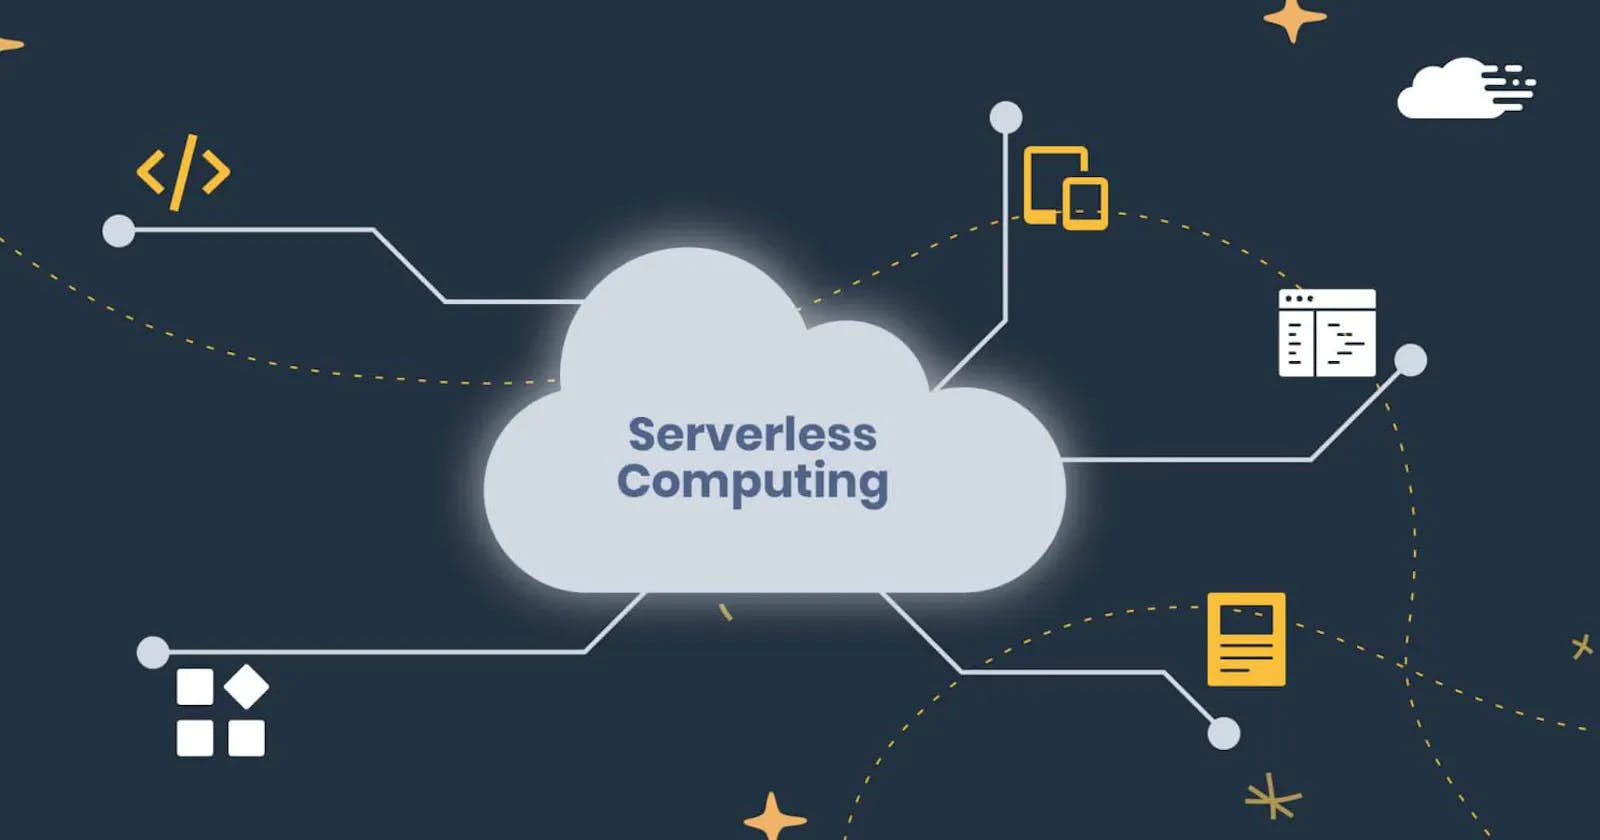 Introduction to Serverless